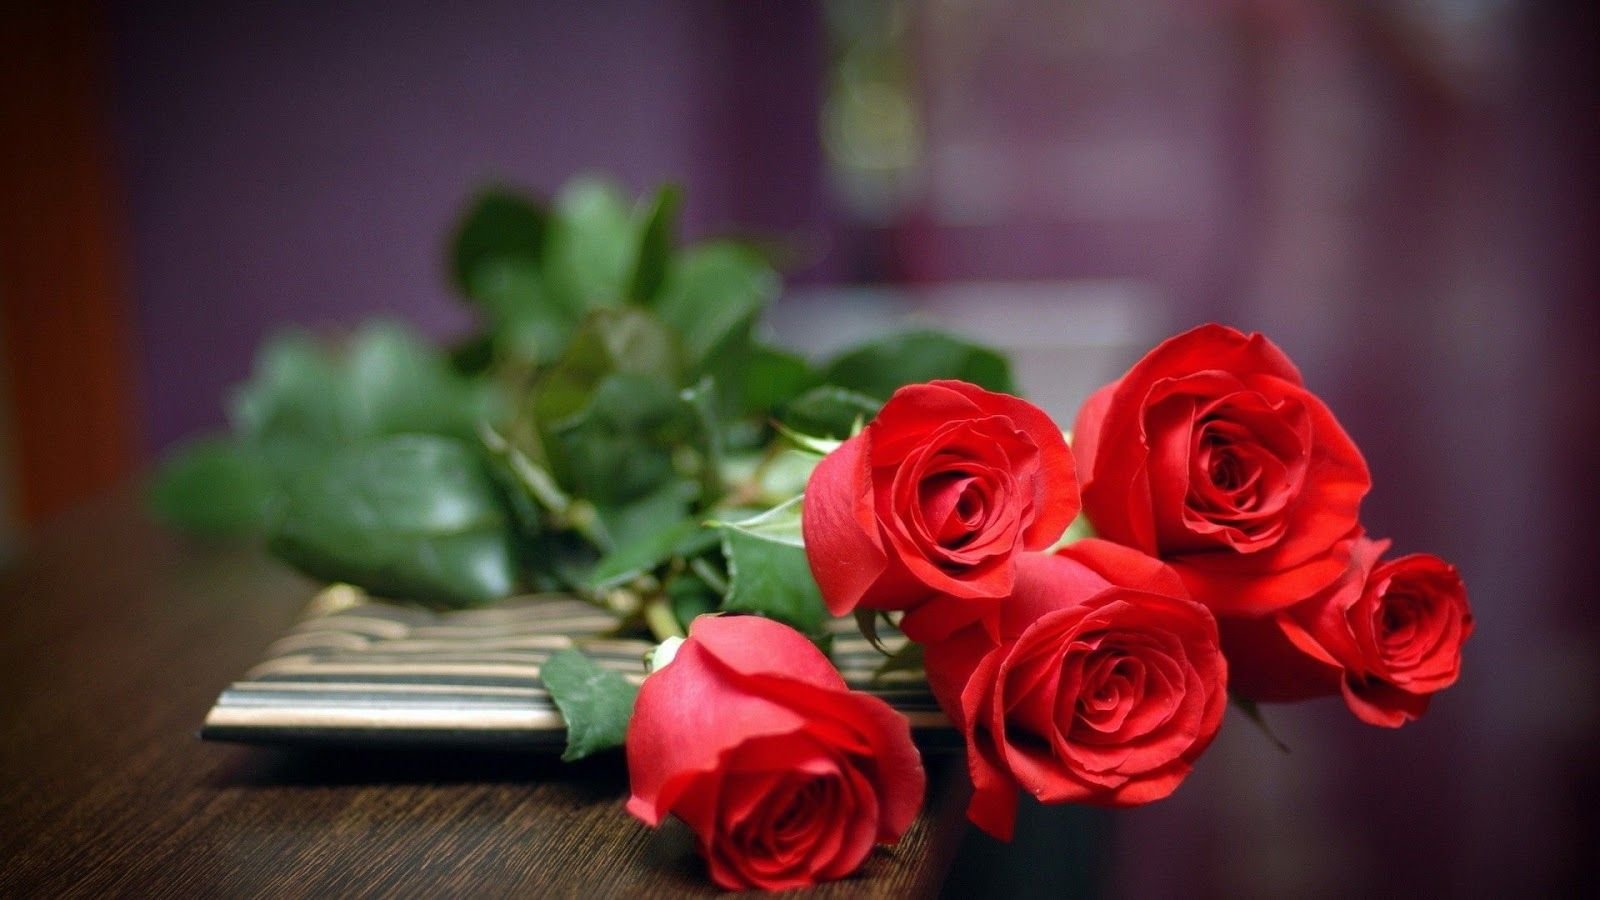 Red roses make every heart beat faster